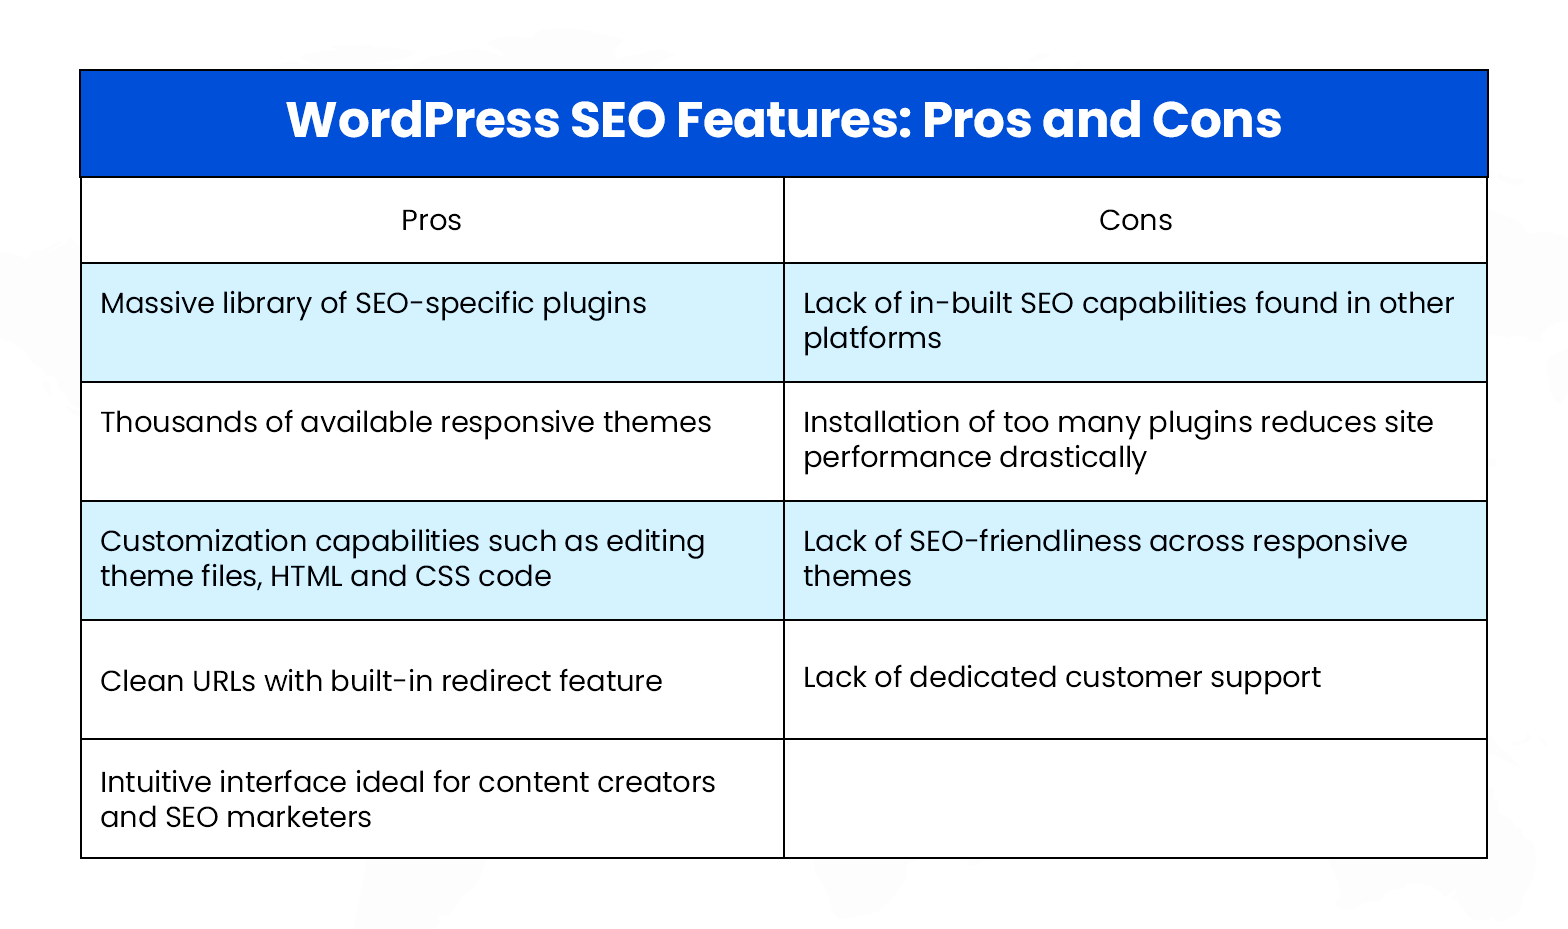 WordPress SEO Features Pros and Cons